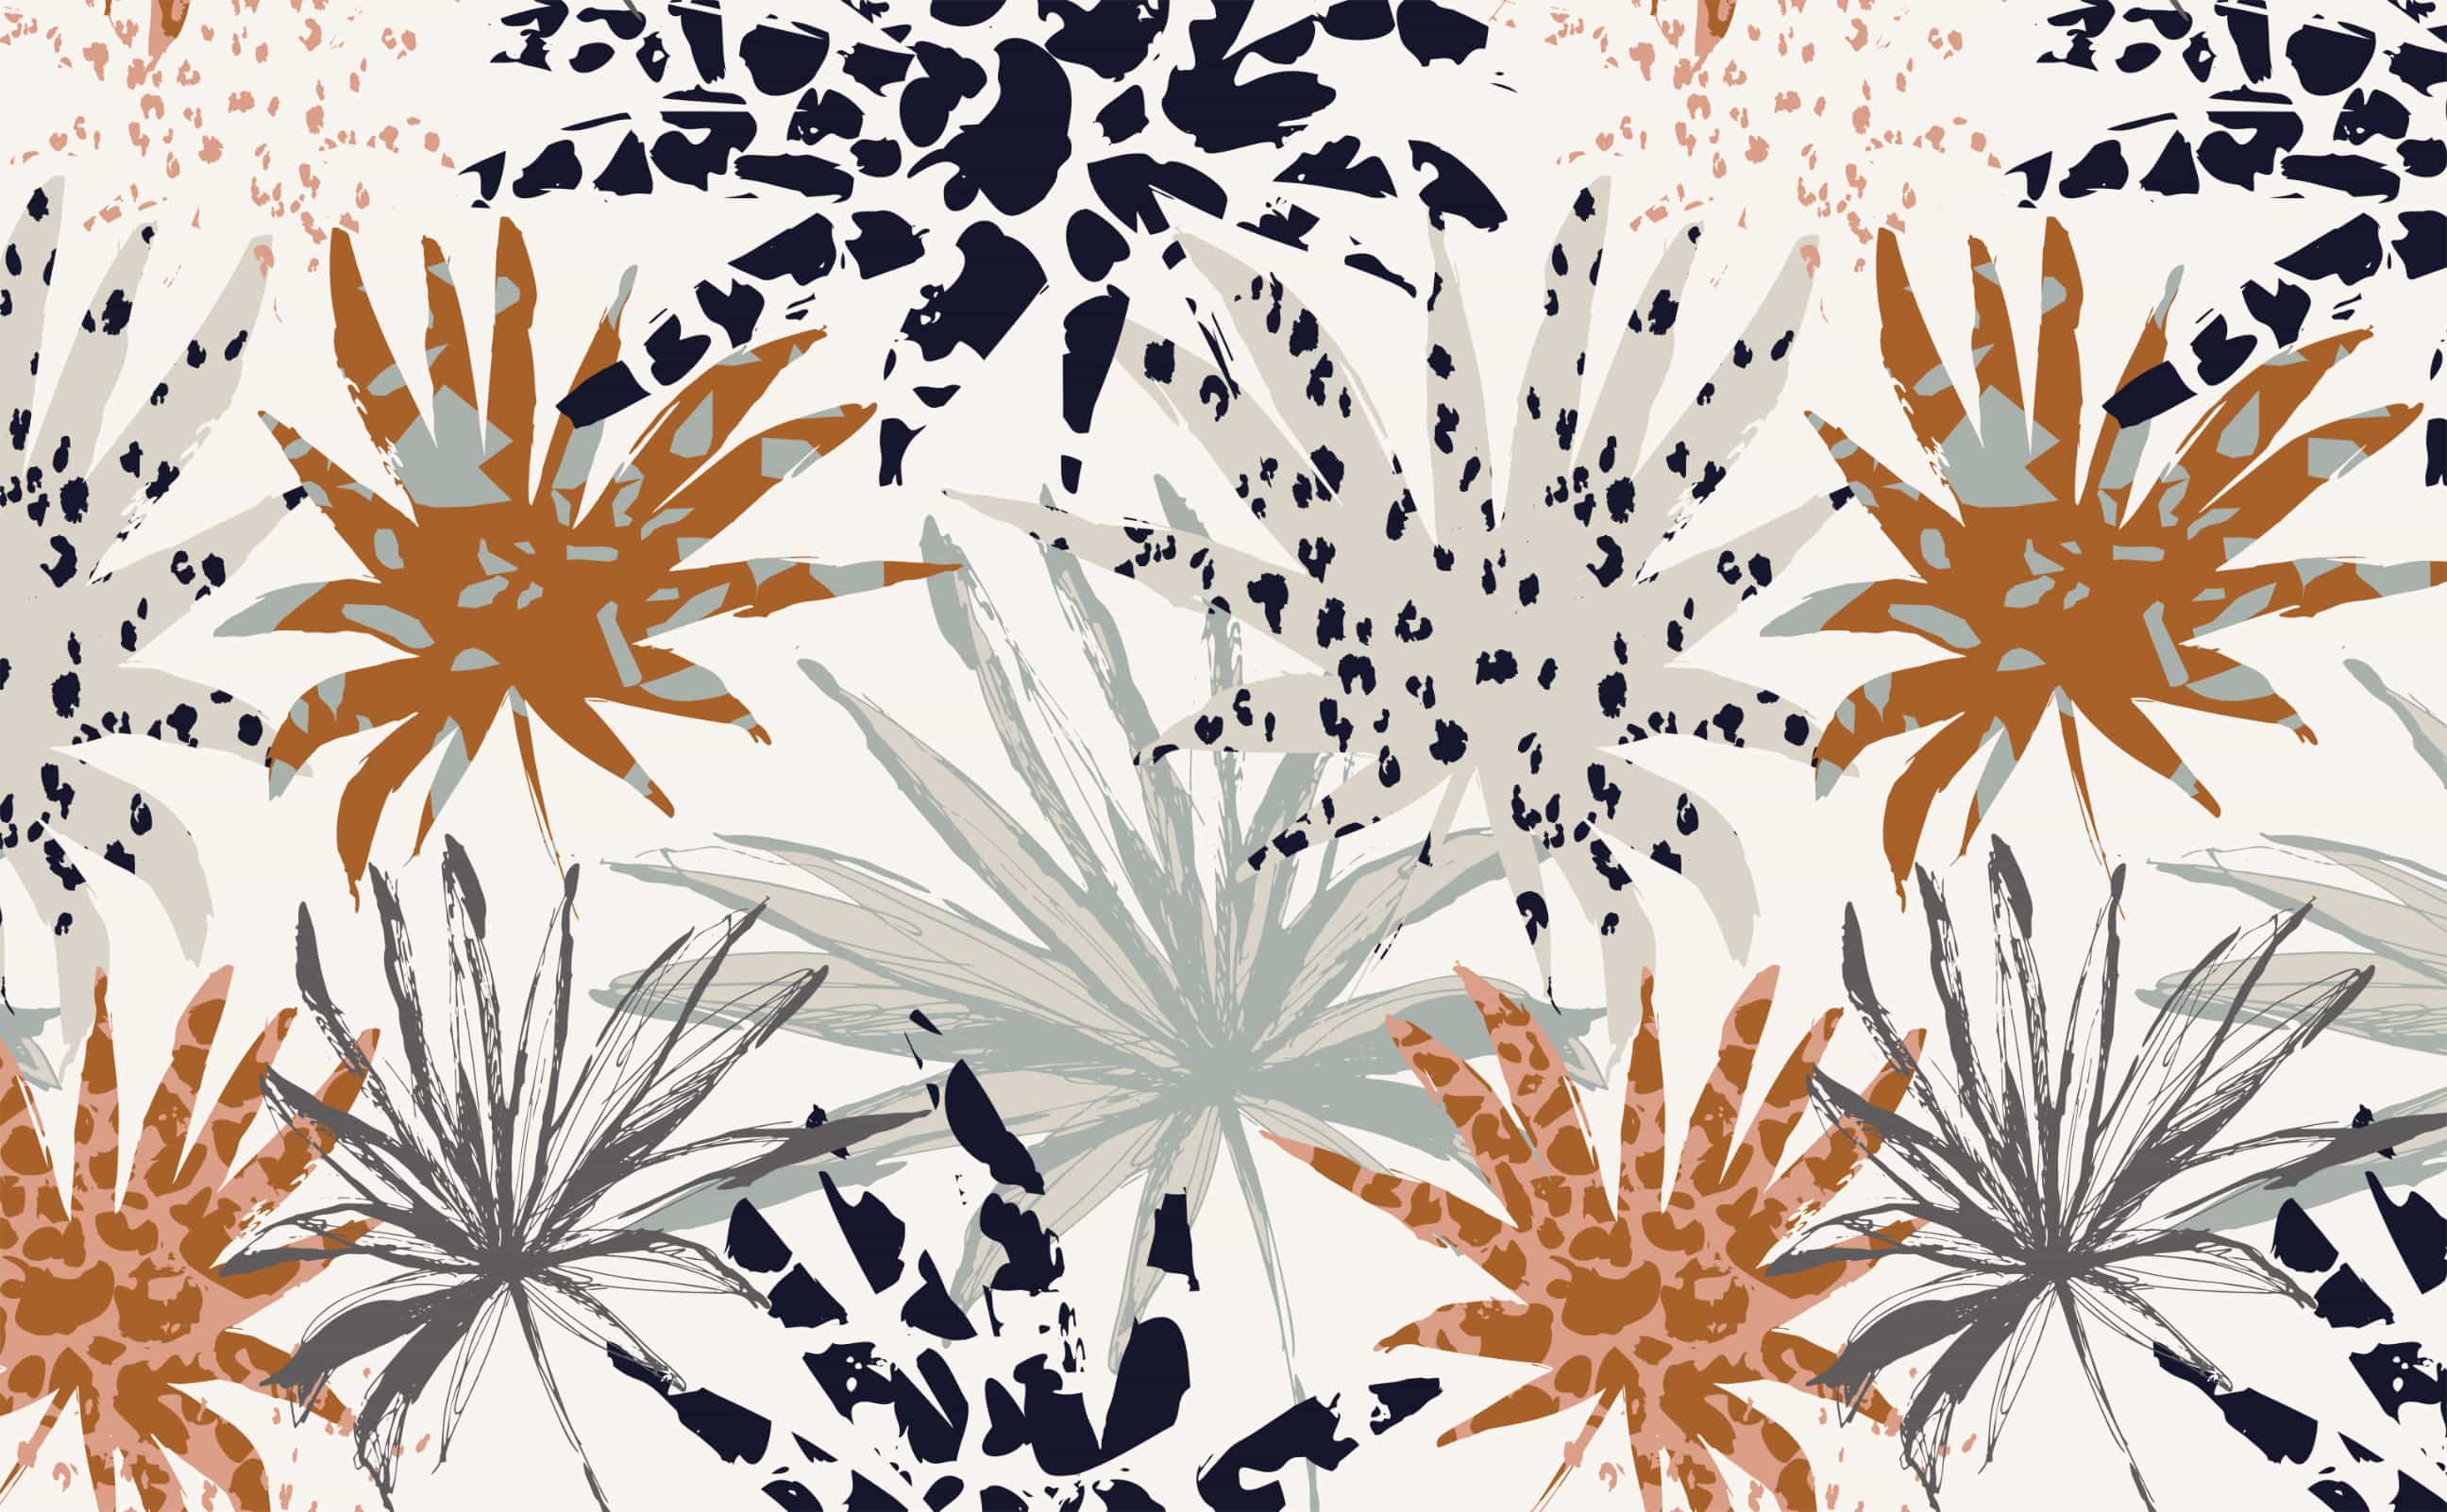 A pattern design of palm leaves and animal print - Boho, pattern, western